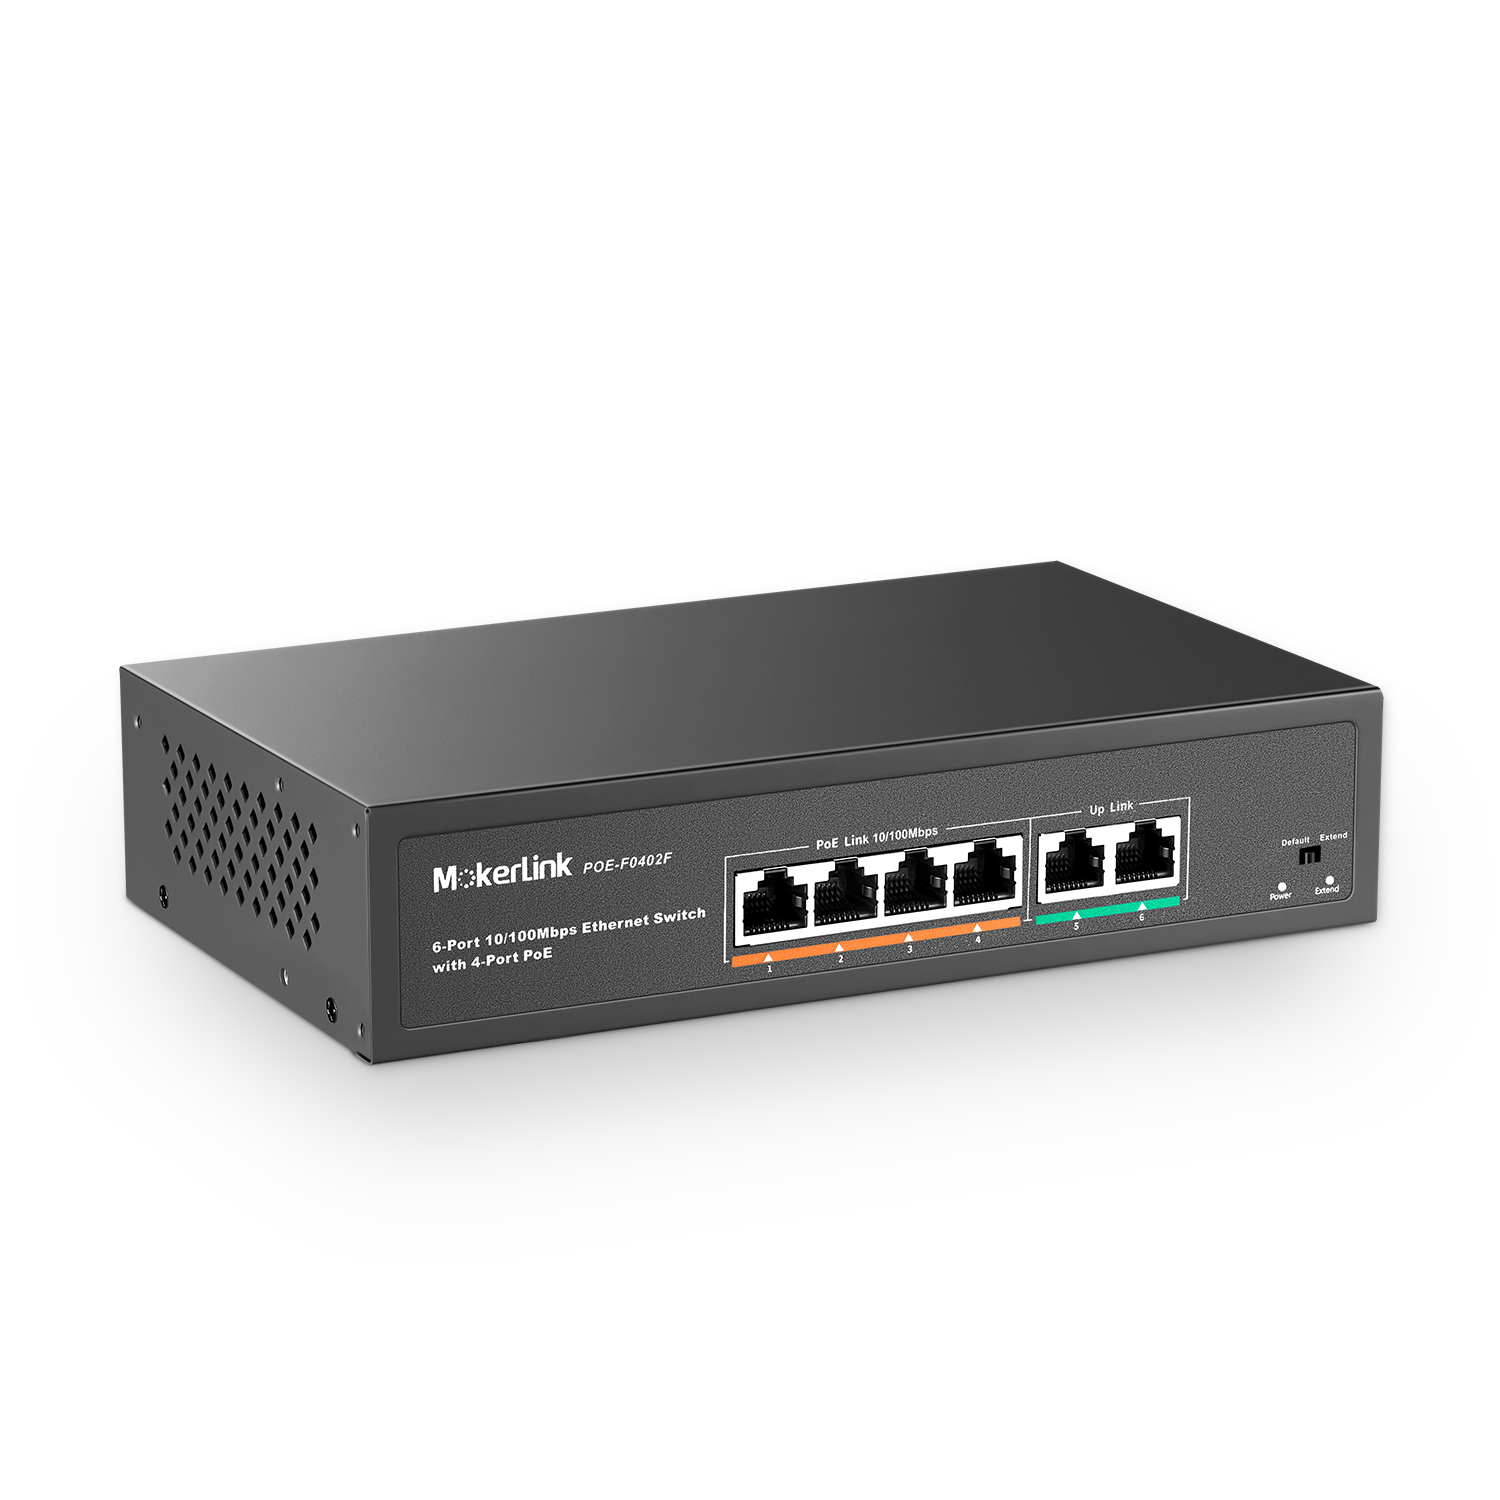 MokerLink 16 Port PoE Switch with 2 Gigabit Uplink Ethernet Port, 250W High  Power, Support IEEE802.3af/at, Rackmount Unmanaged Plug and Play - Buy  MokerLink 16 Port PoE Switch with 2 Gigabit Uplink